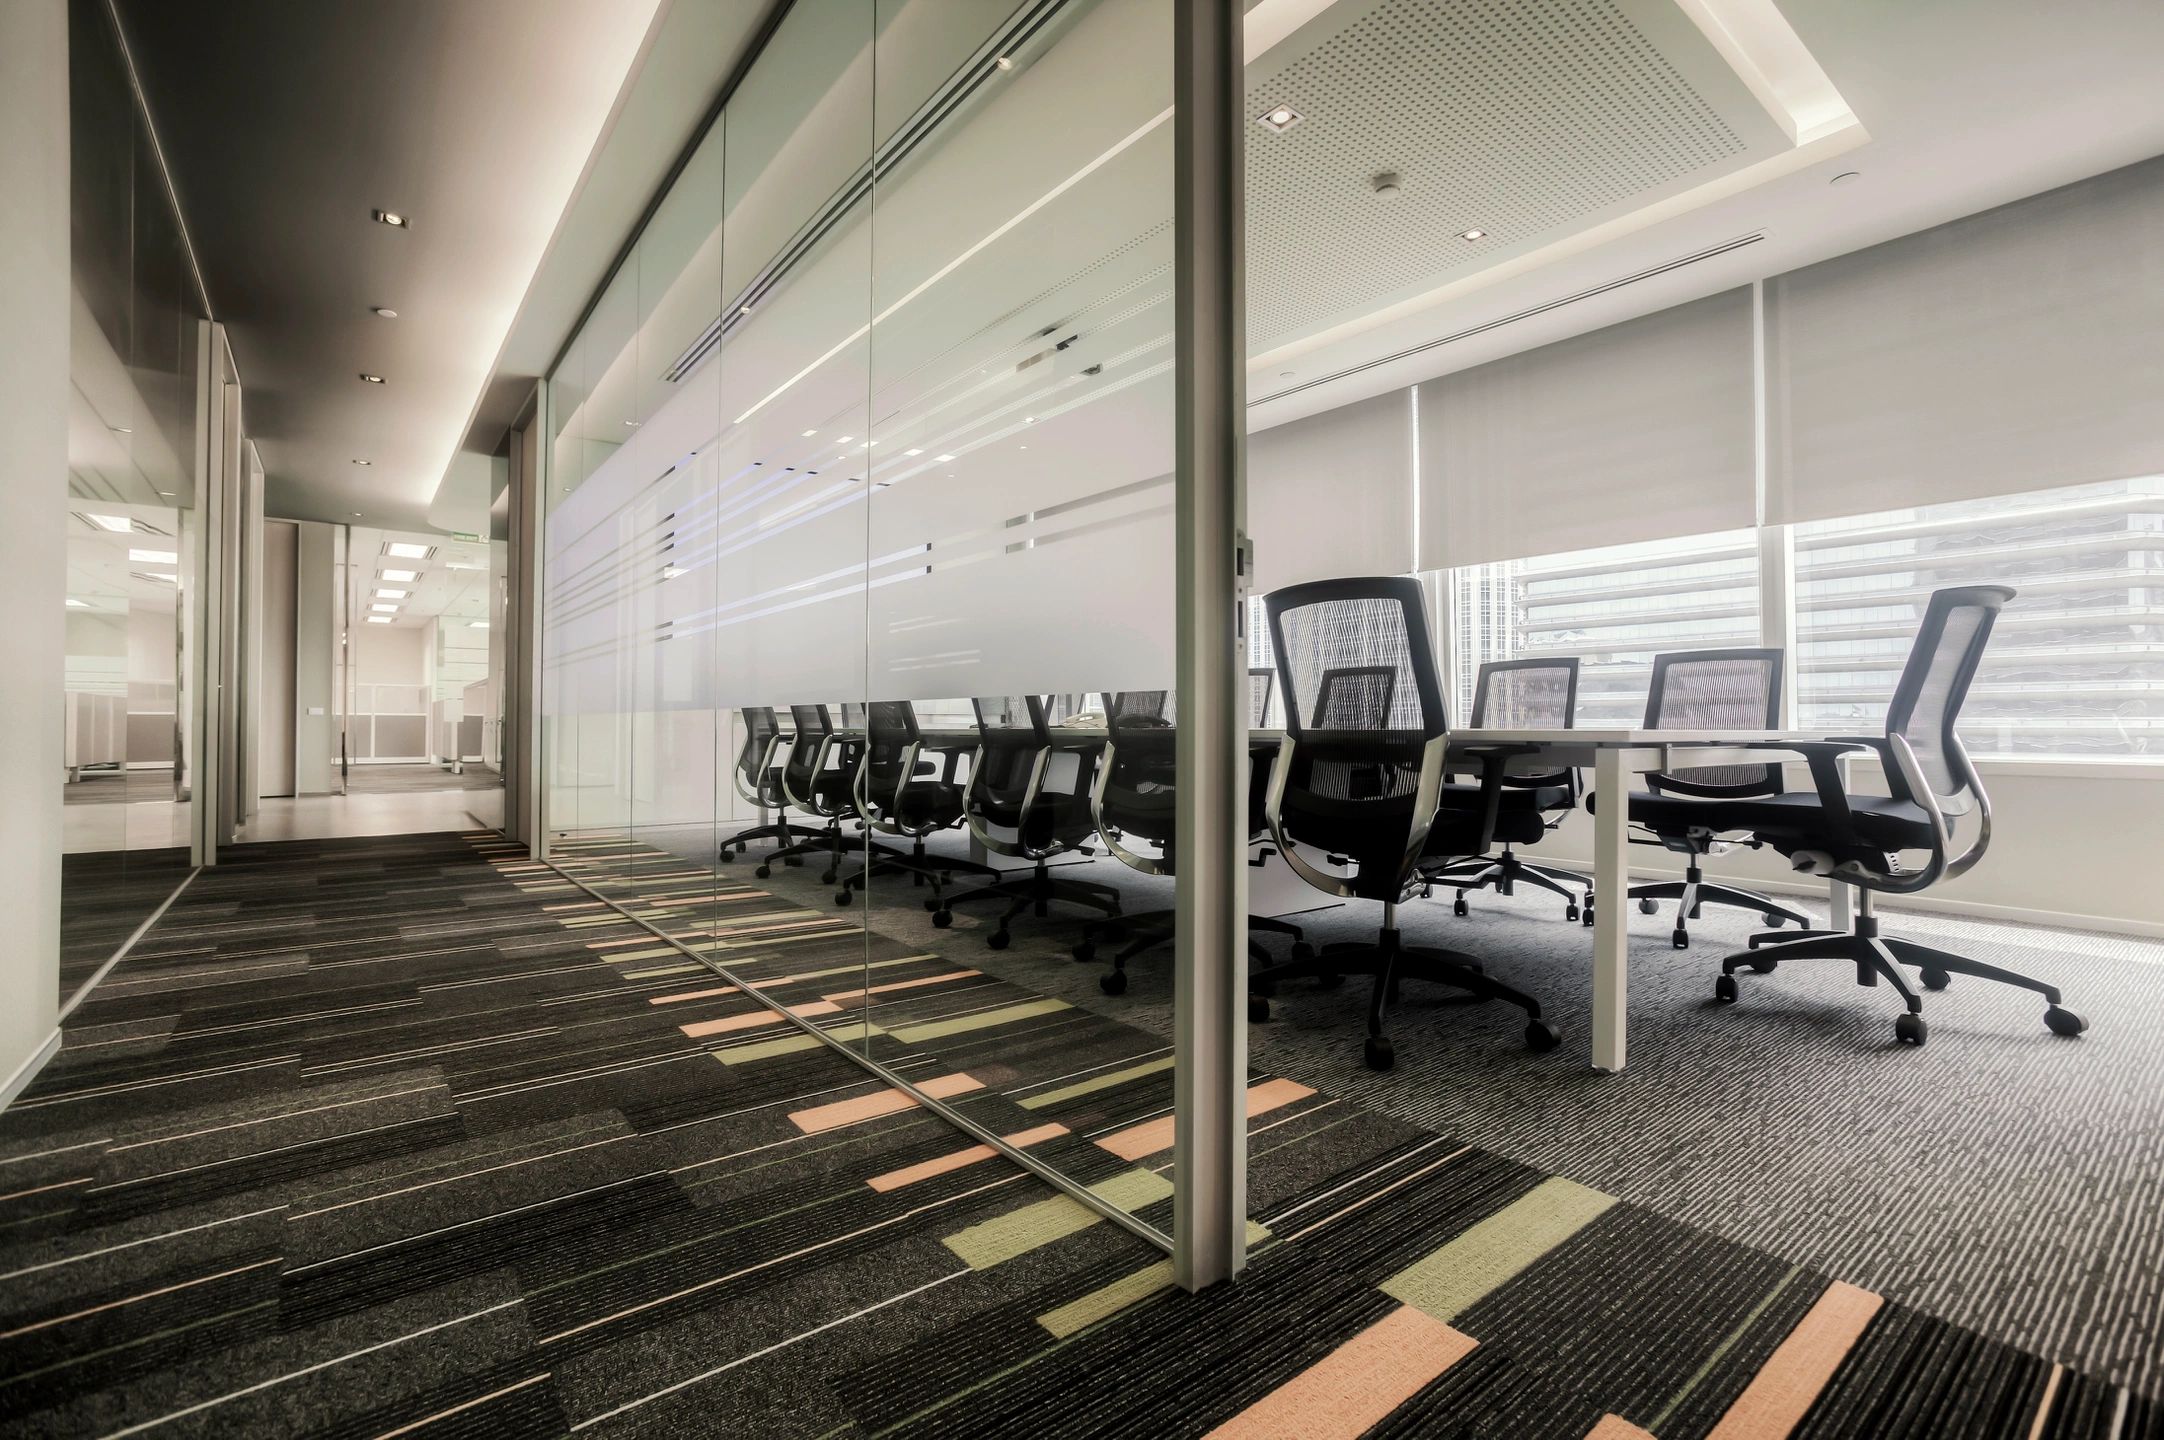 Office Soundproofing, Ceilings, Glass Walls in a soundproof office with Conference Room Echo Reduction